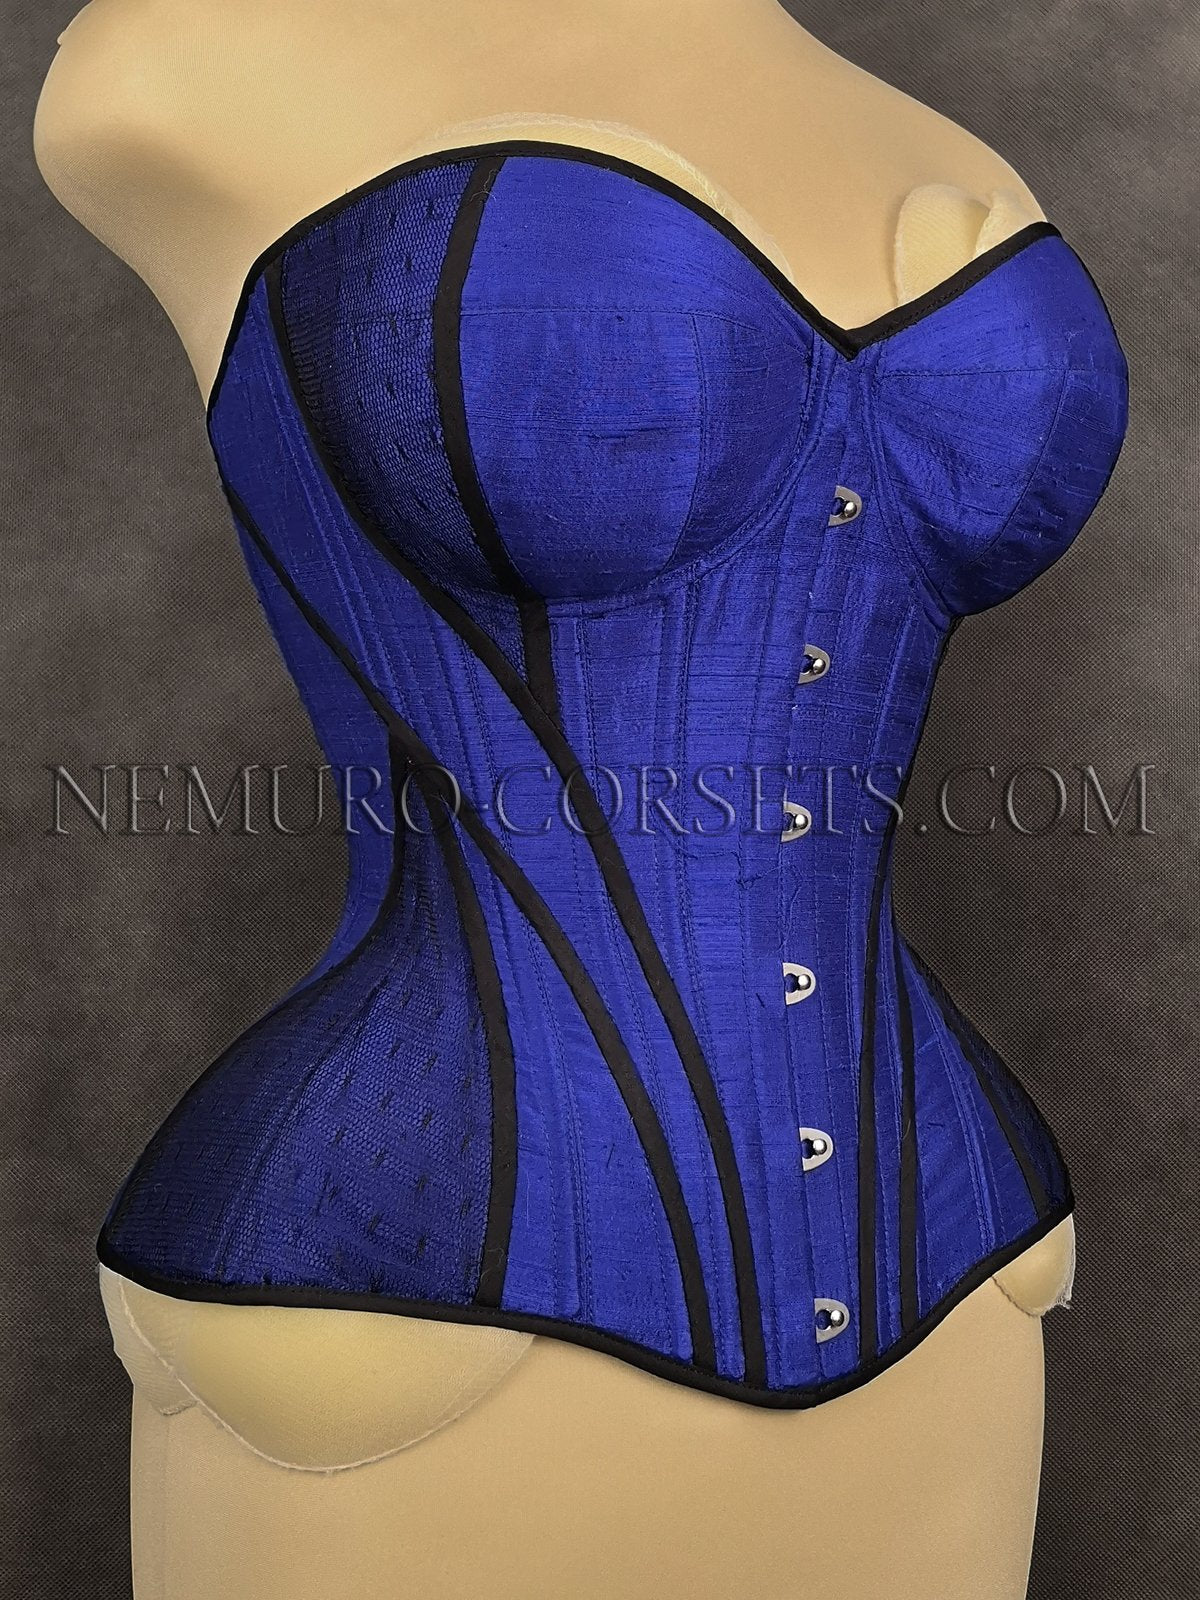 Cupped Overbust corset solid front - Custom order Nemuro-Corsets